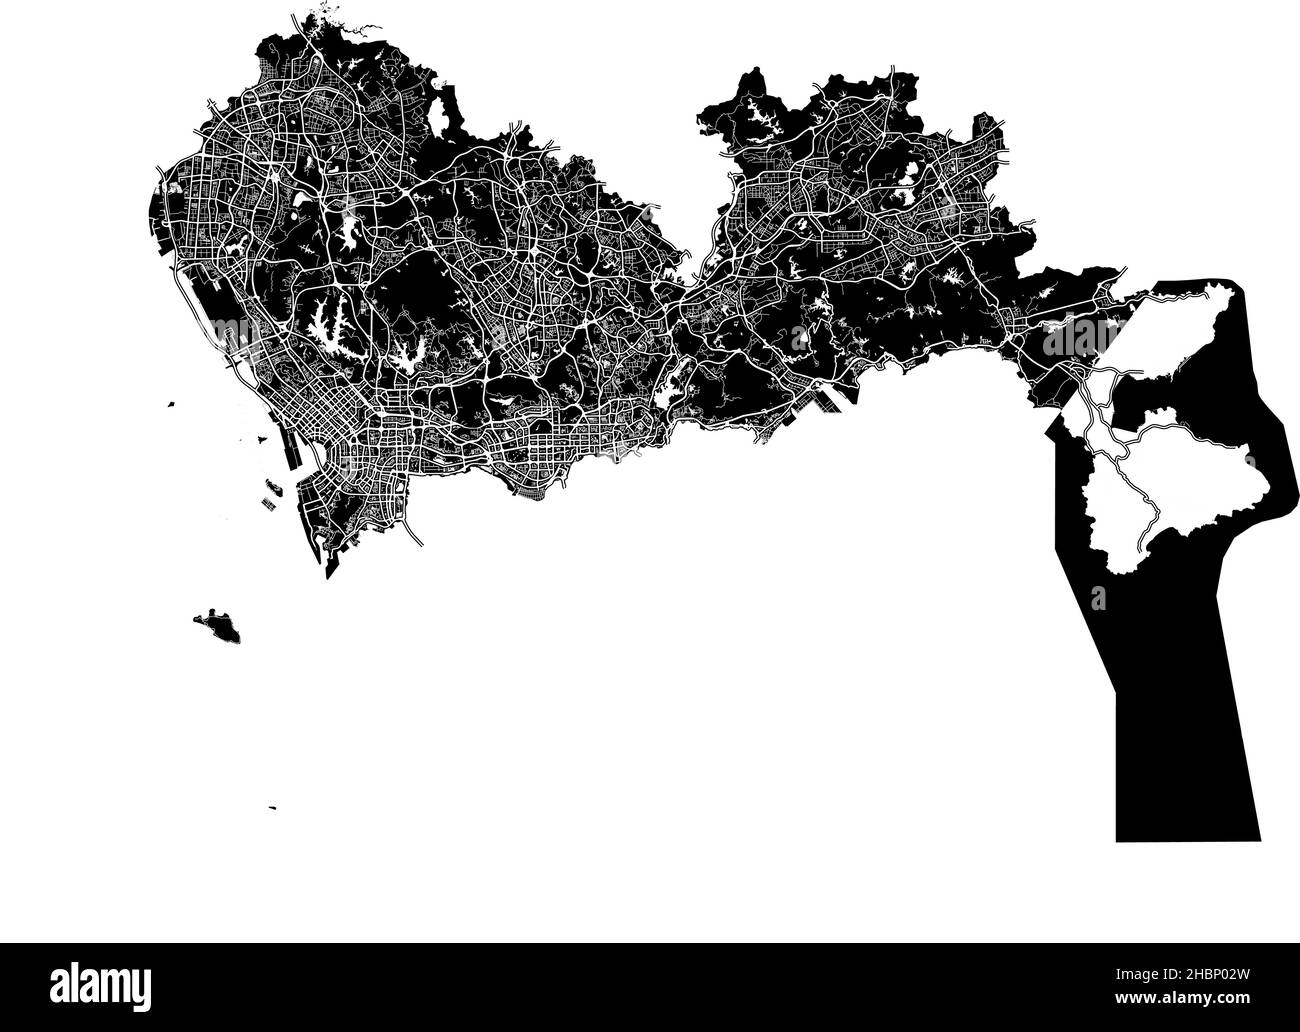 Shenzhen, China, high resolution vector map with city boundaries, and editable paths. The city map was drawn with white areas and lines for main roads Stock Vector